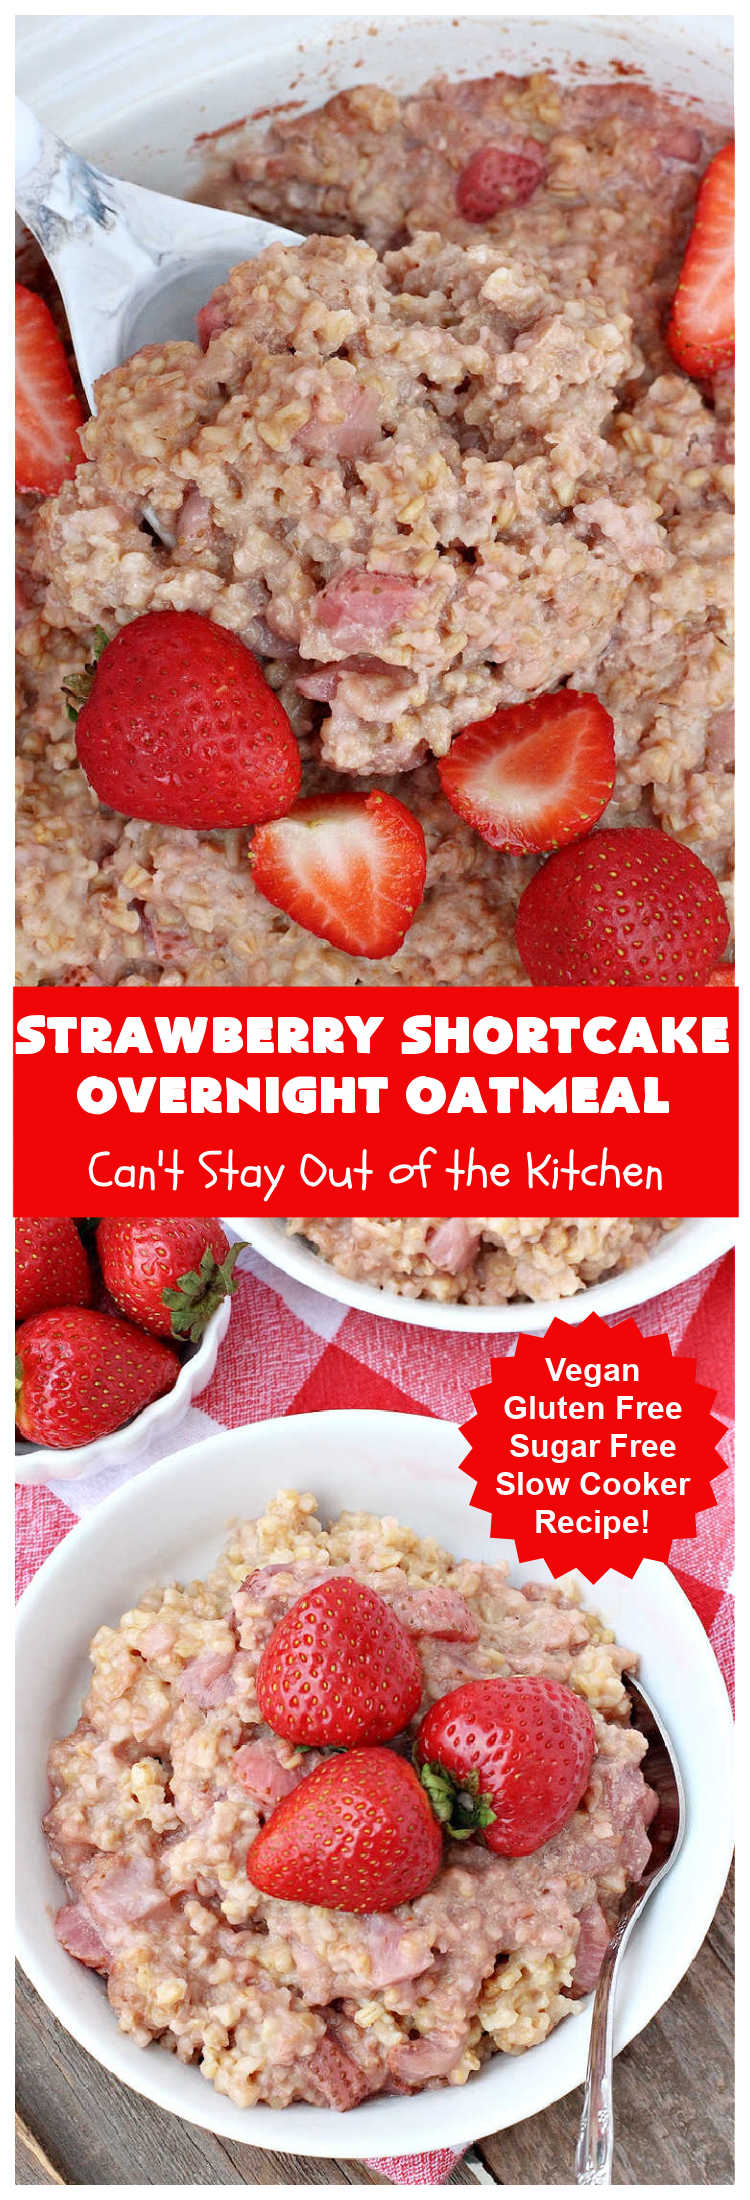 Strawberry Shortcake Overnight Oatmeal | Can't Stay Out of the Kitchen | Add a touch of #StrawberryShortcake to your morning #breakfast routine with this delightful #OvernightOatmeal #recipe. It's #healthy, #vegan, #GlutenFree,  #SugarFree & cooks up in the #SlowCooker so it's really easy. #crockpot #oatmeal #SteelCutOats #holiday #HolidayBreakfast #StrawberryShortcakeOvernightOatmeal